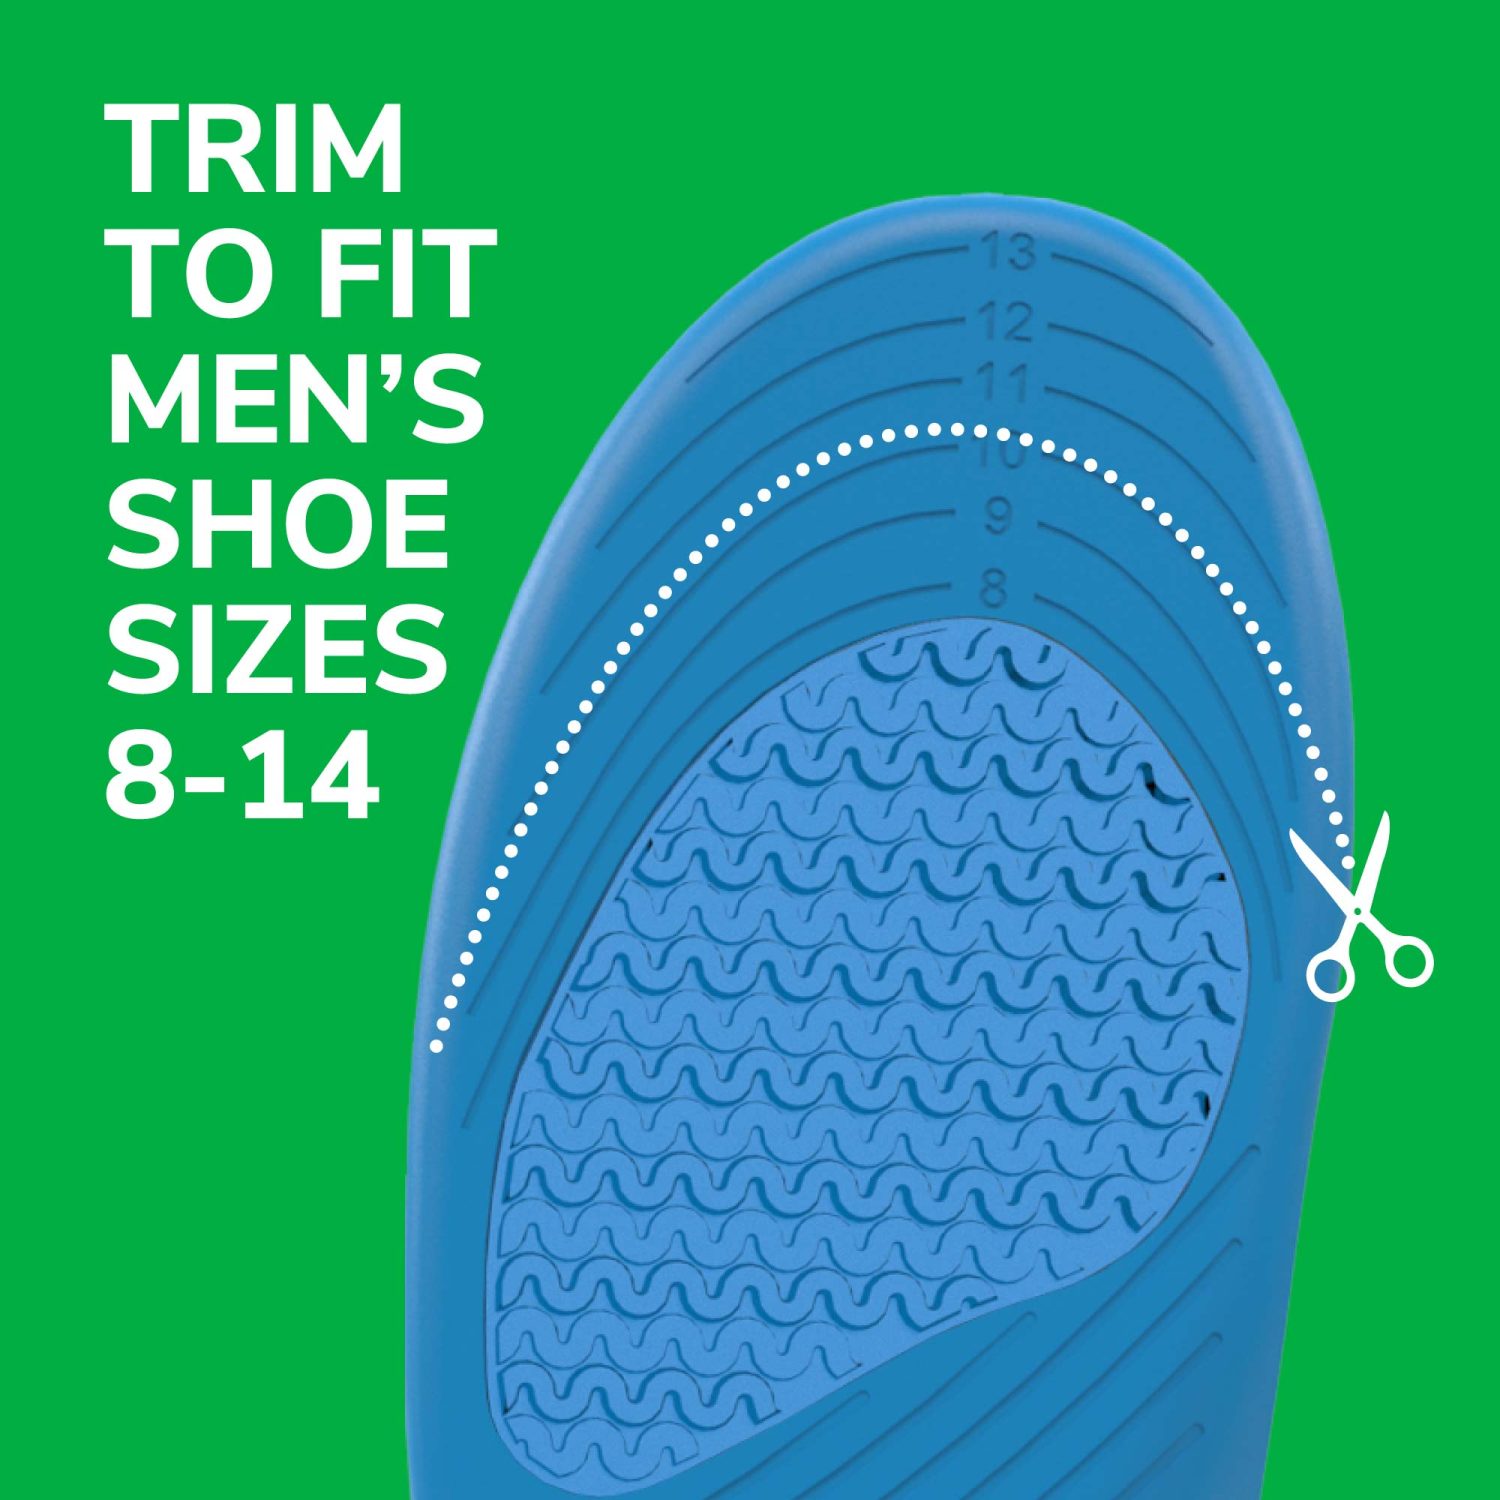 Can Insoles Be Trimmed To Fit Different Shoe Sizes?